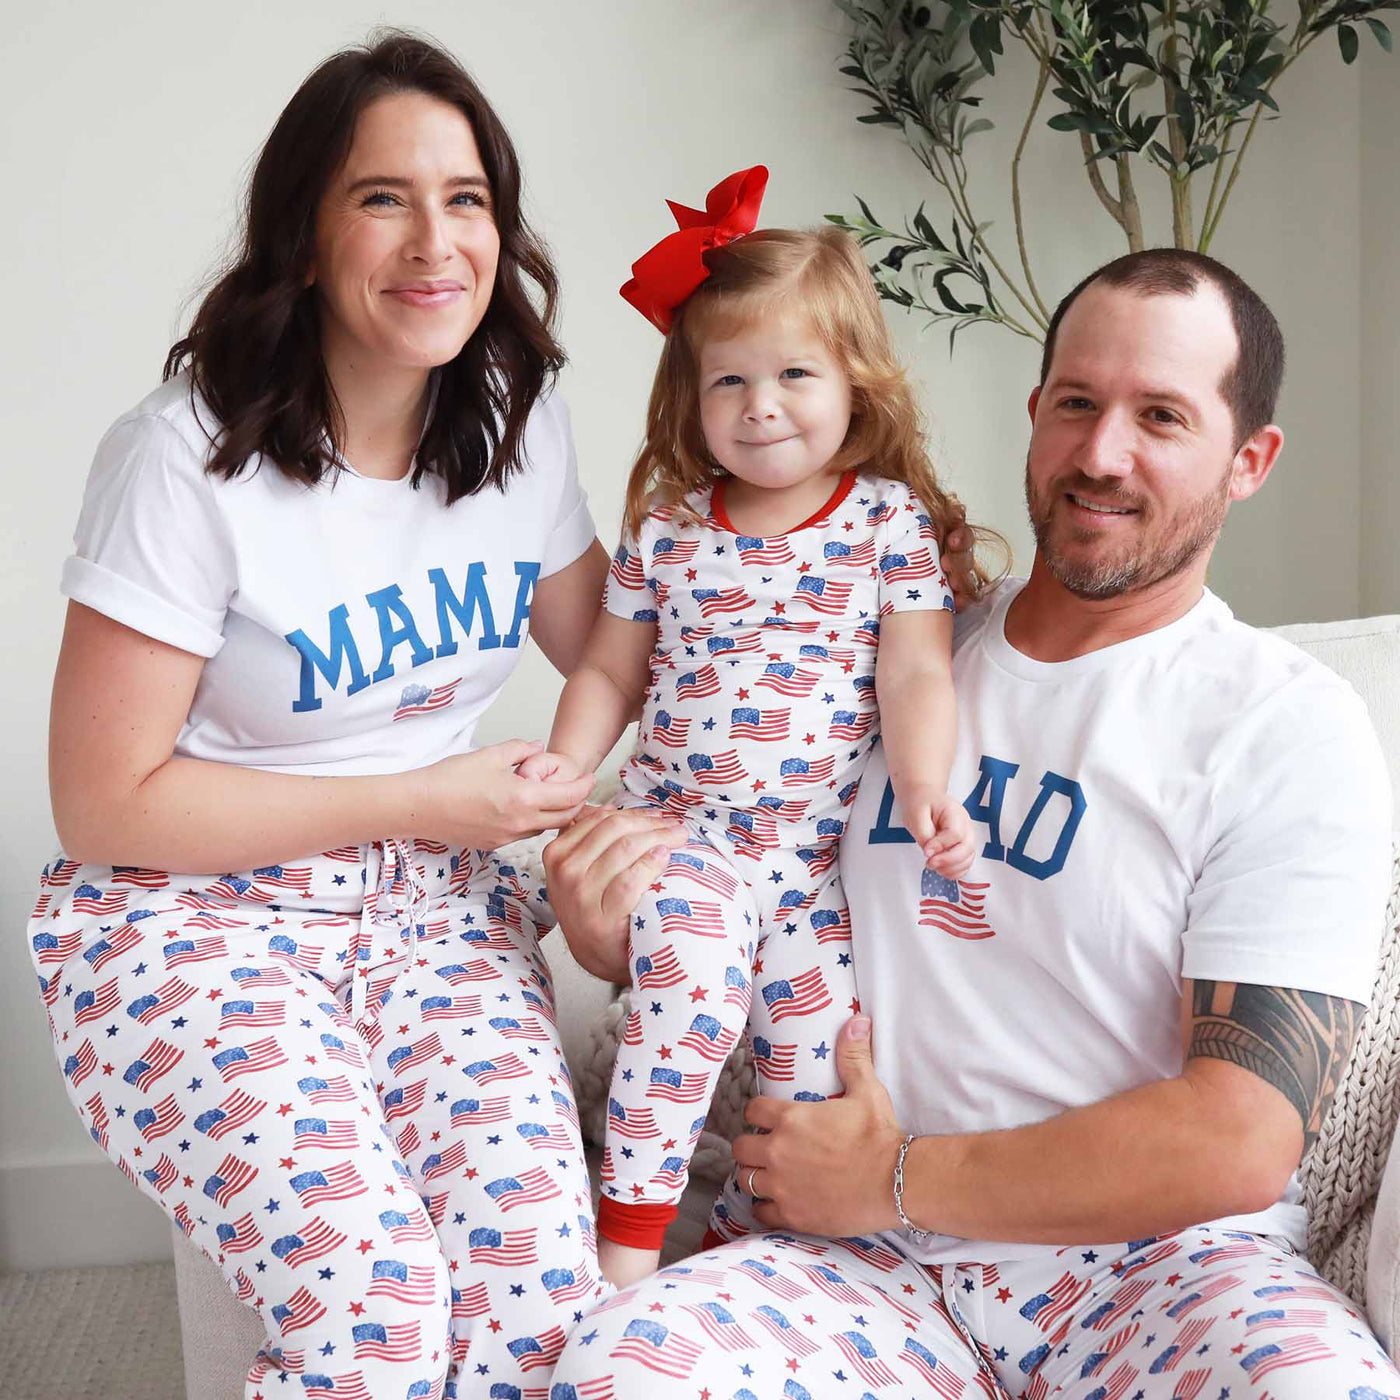 matching family pajamas for thr 4th of july with flags